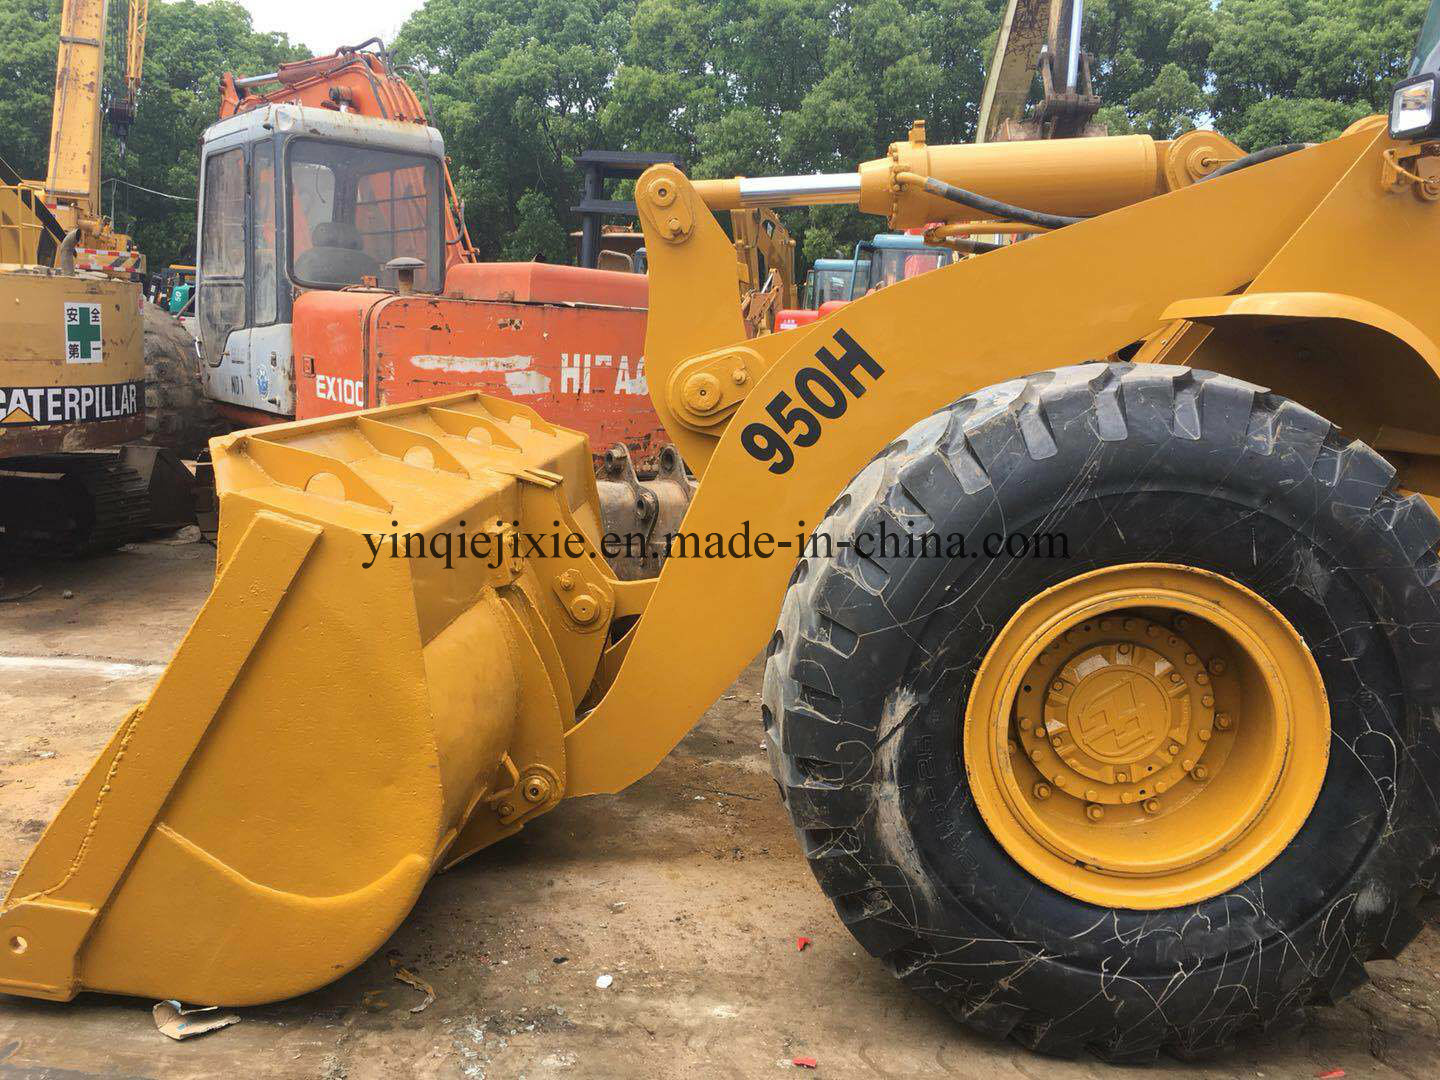 Cheap Price Front Loaders Cat 950h Used Wheel Loader Used Caterpillar Loader